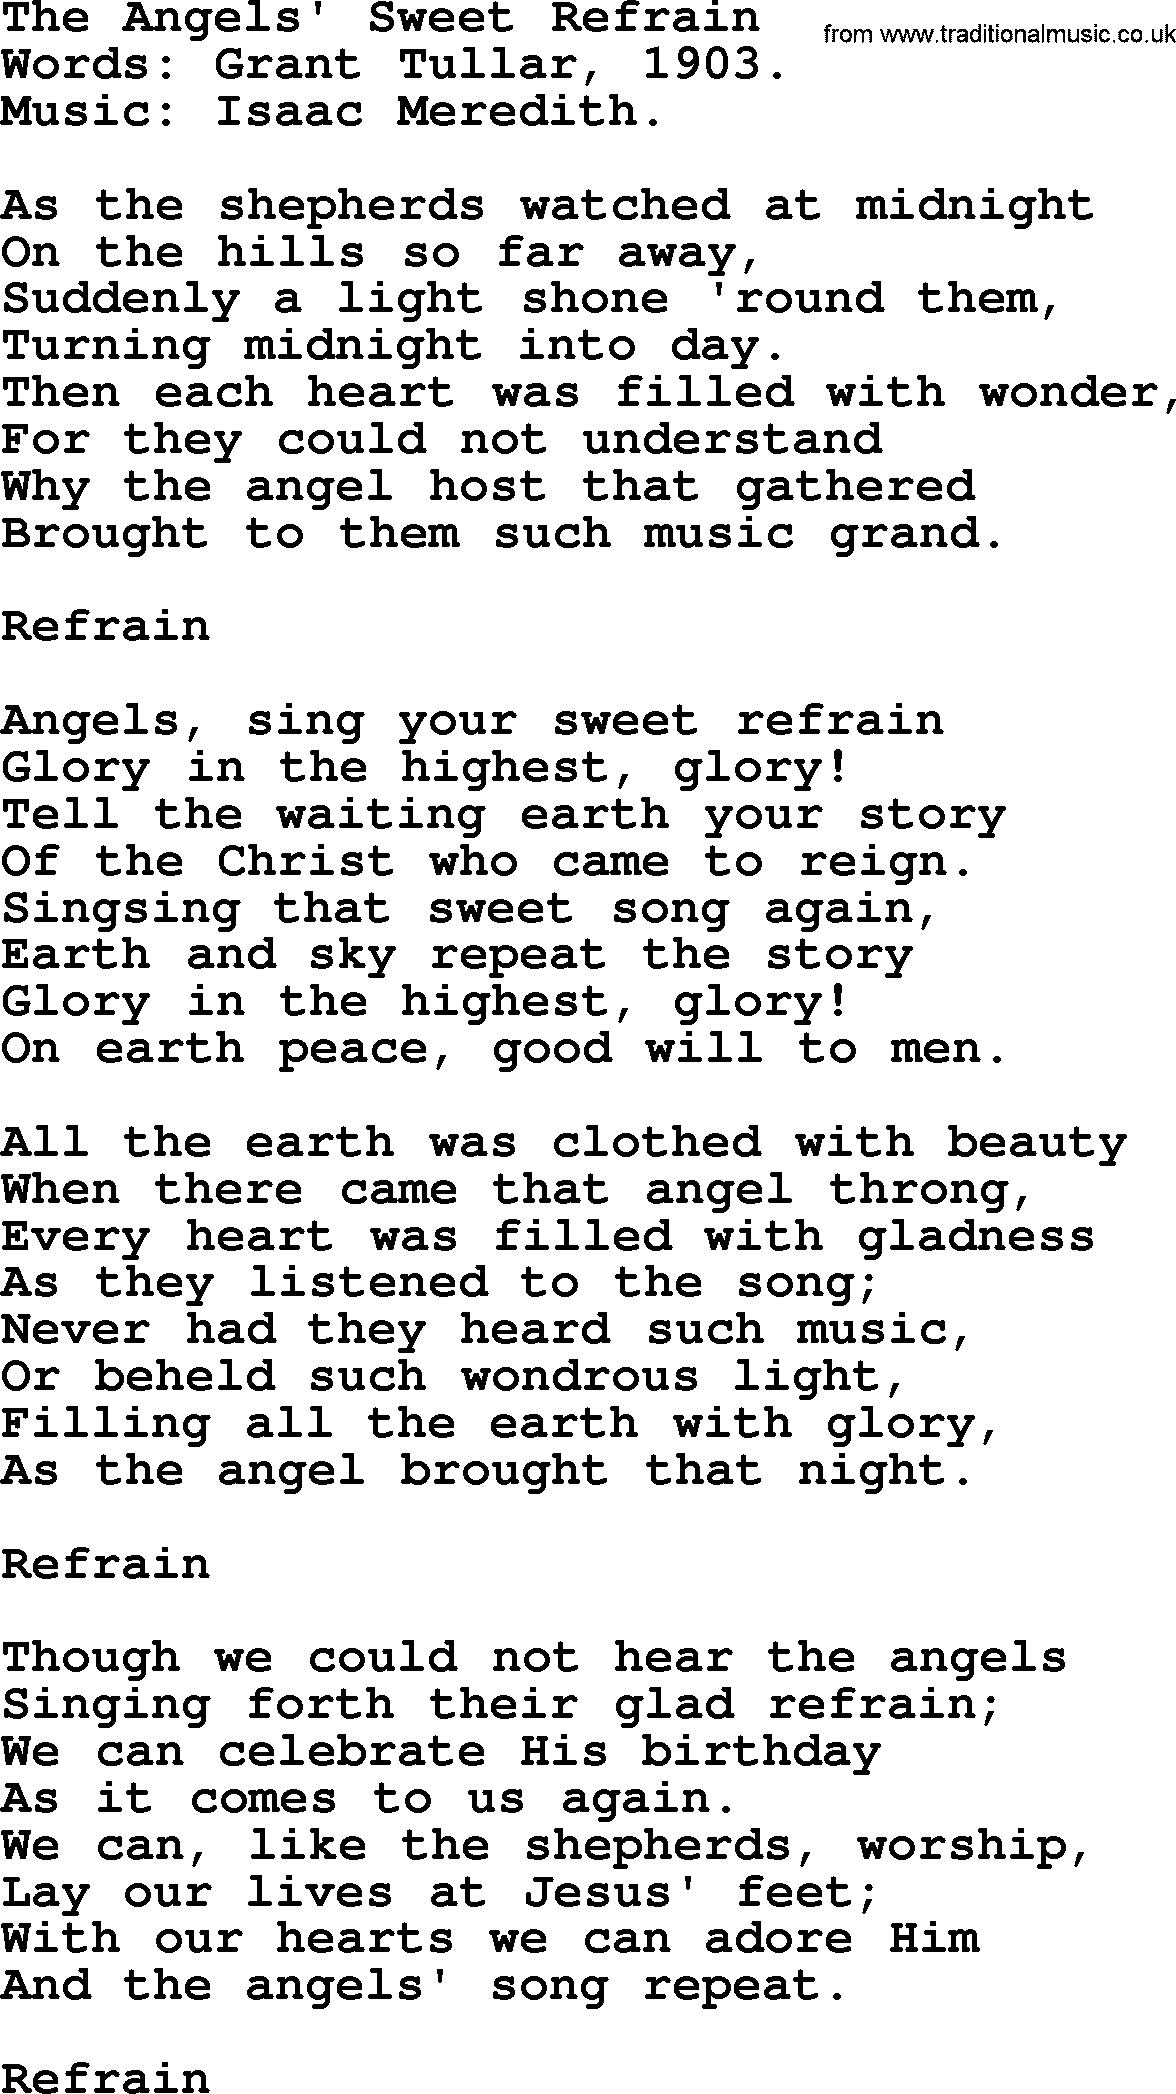 Christmas Hymns, Carols and Songs, title: The Angels' Sweet Refrain, lyrics with PDF